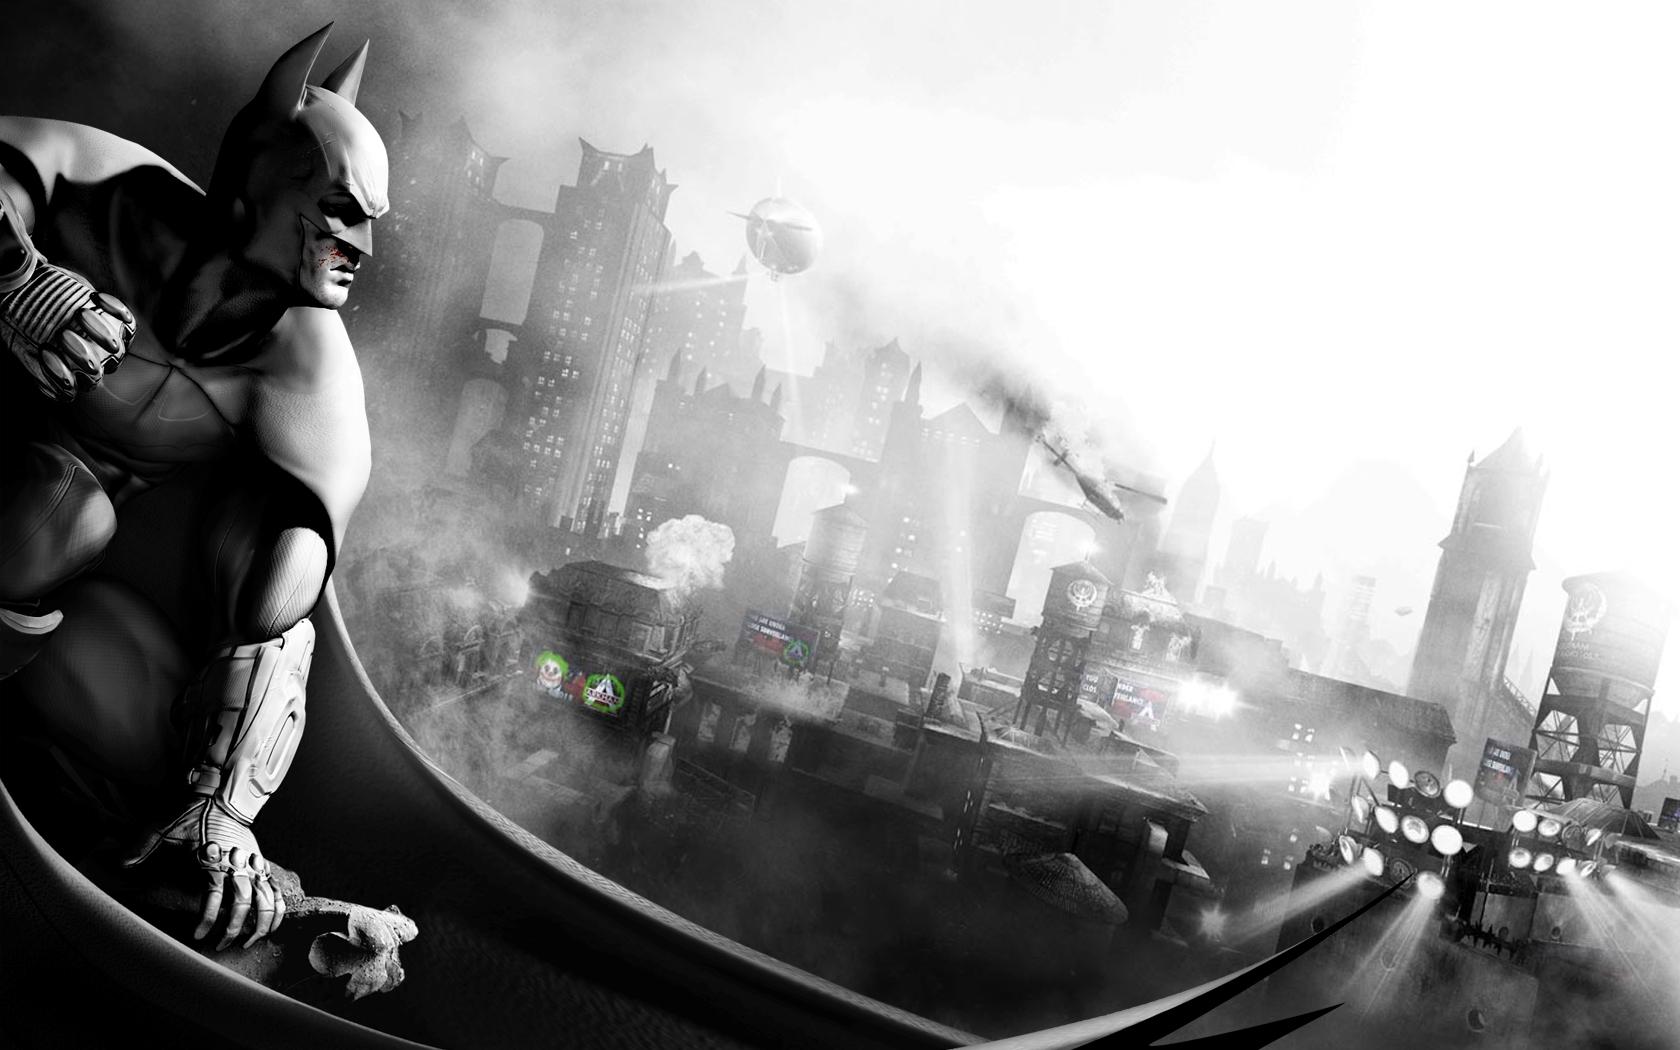 For a real Windows 7 Batman theme check this out